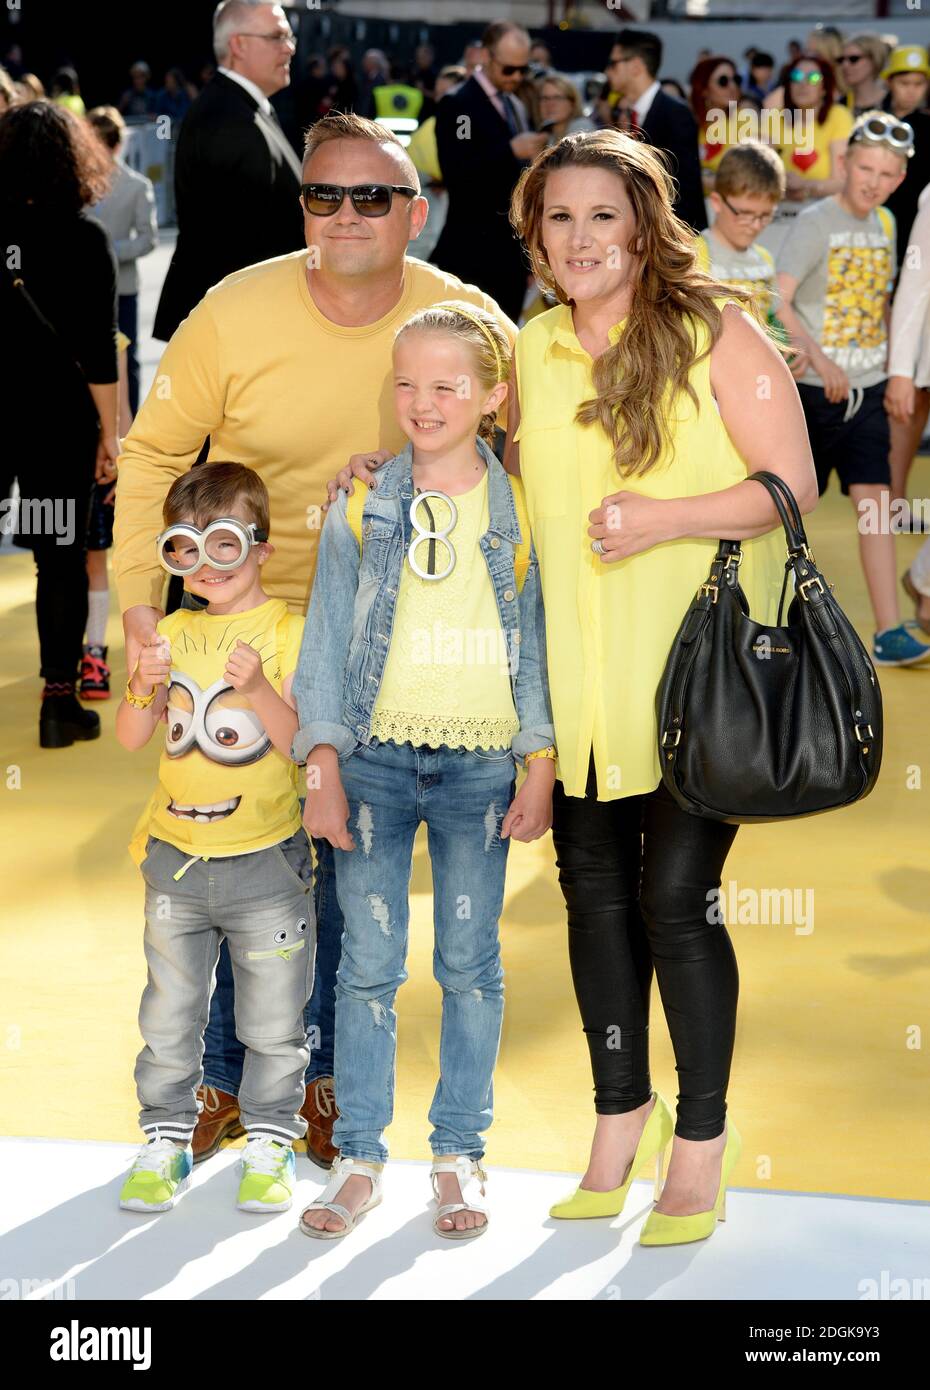 Sam Bailey, Craig Pearson, son Tommy and daughter Brooke attending the Minions UK Film Premiere held at the Odeon cinema Leicester Square, London  (Mandatory Credit: DOUG PETERS/ EMPICS Entertainment) Stock Photo